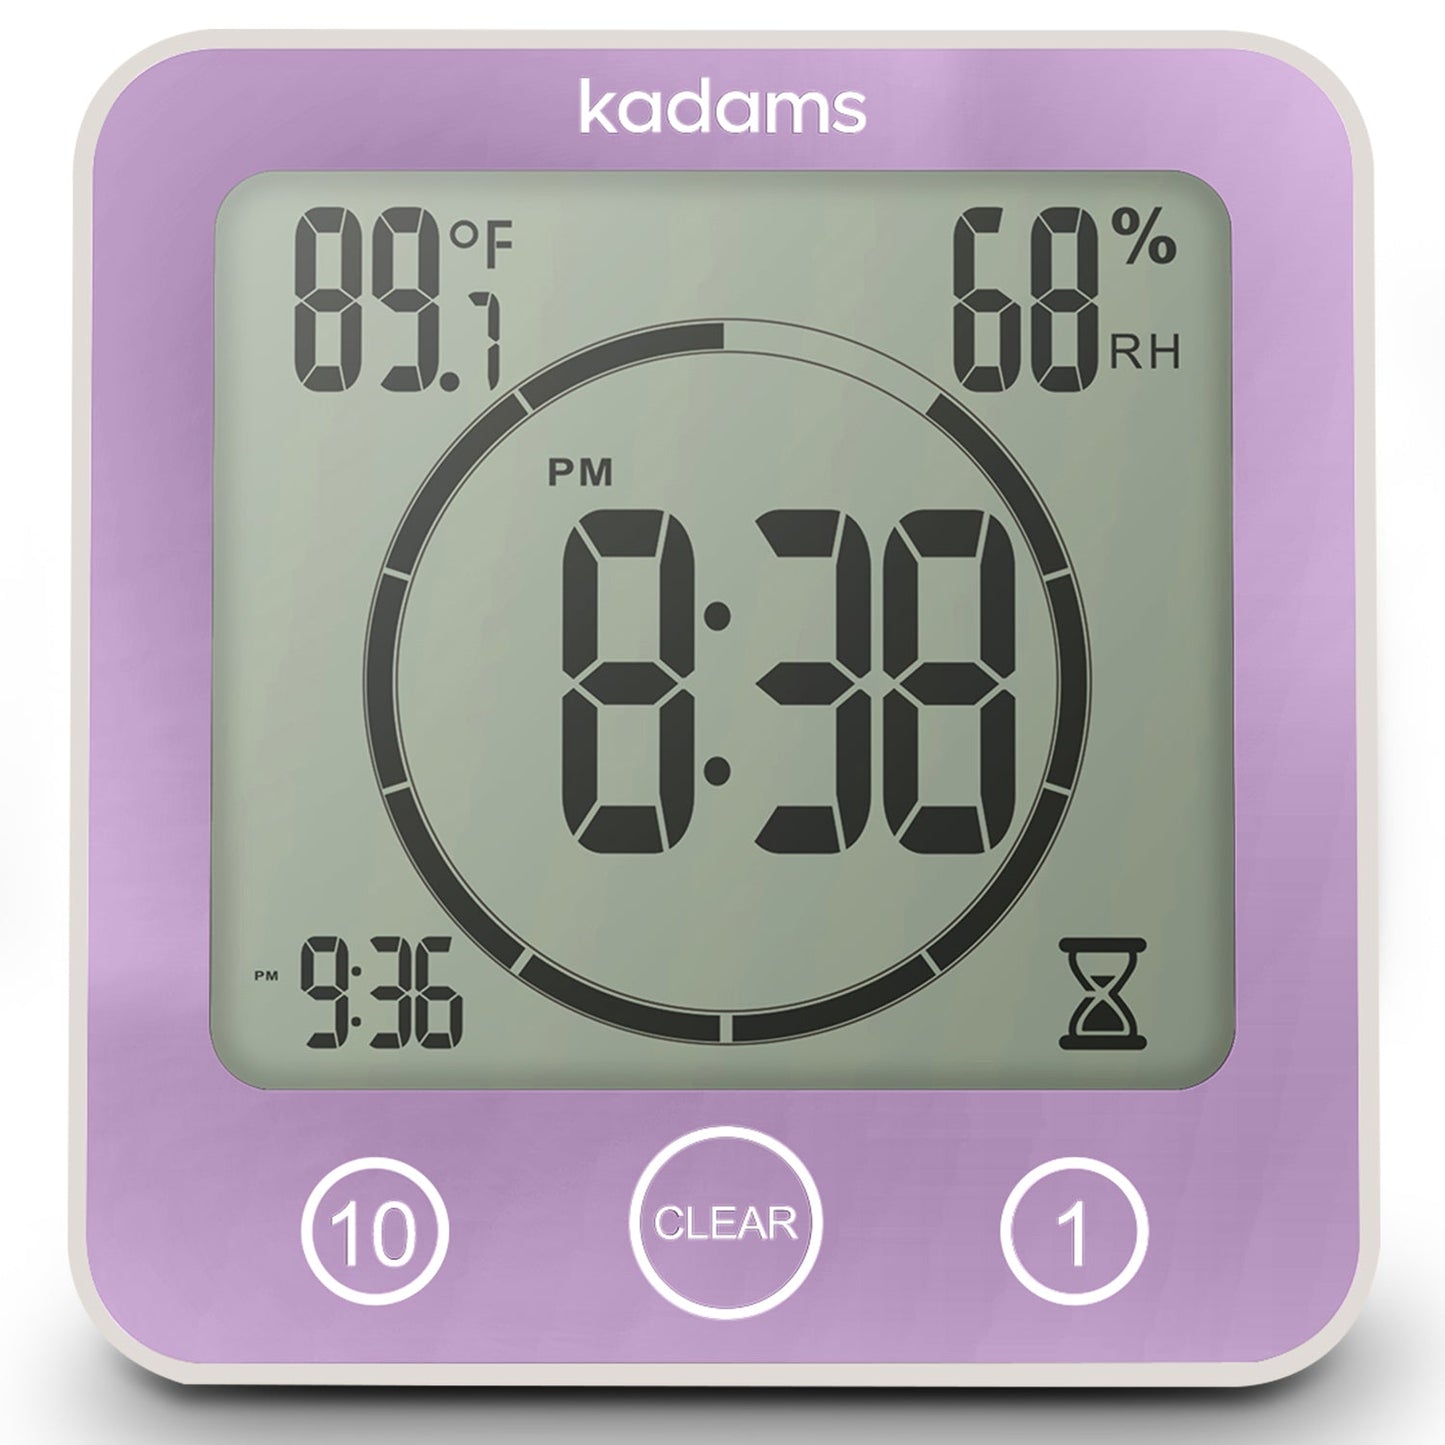 KADAMS Digital Bathroom Shower Kitchen Clock Timer with Alarm, Waterproof for Water Splashes, Visual Countdown Timer, Time Management Tool, Indoor Temperature Humidity, Suction Cup Hole Stand - Purple